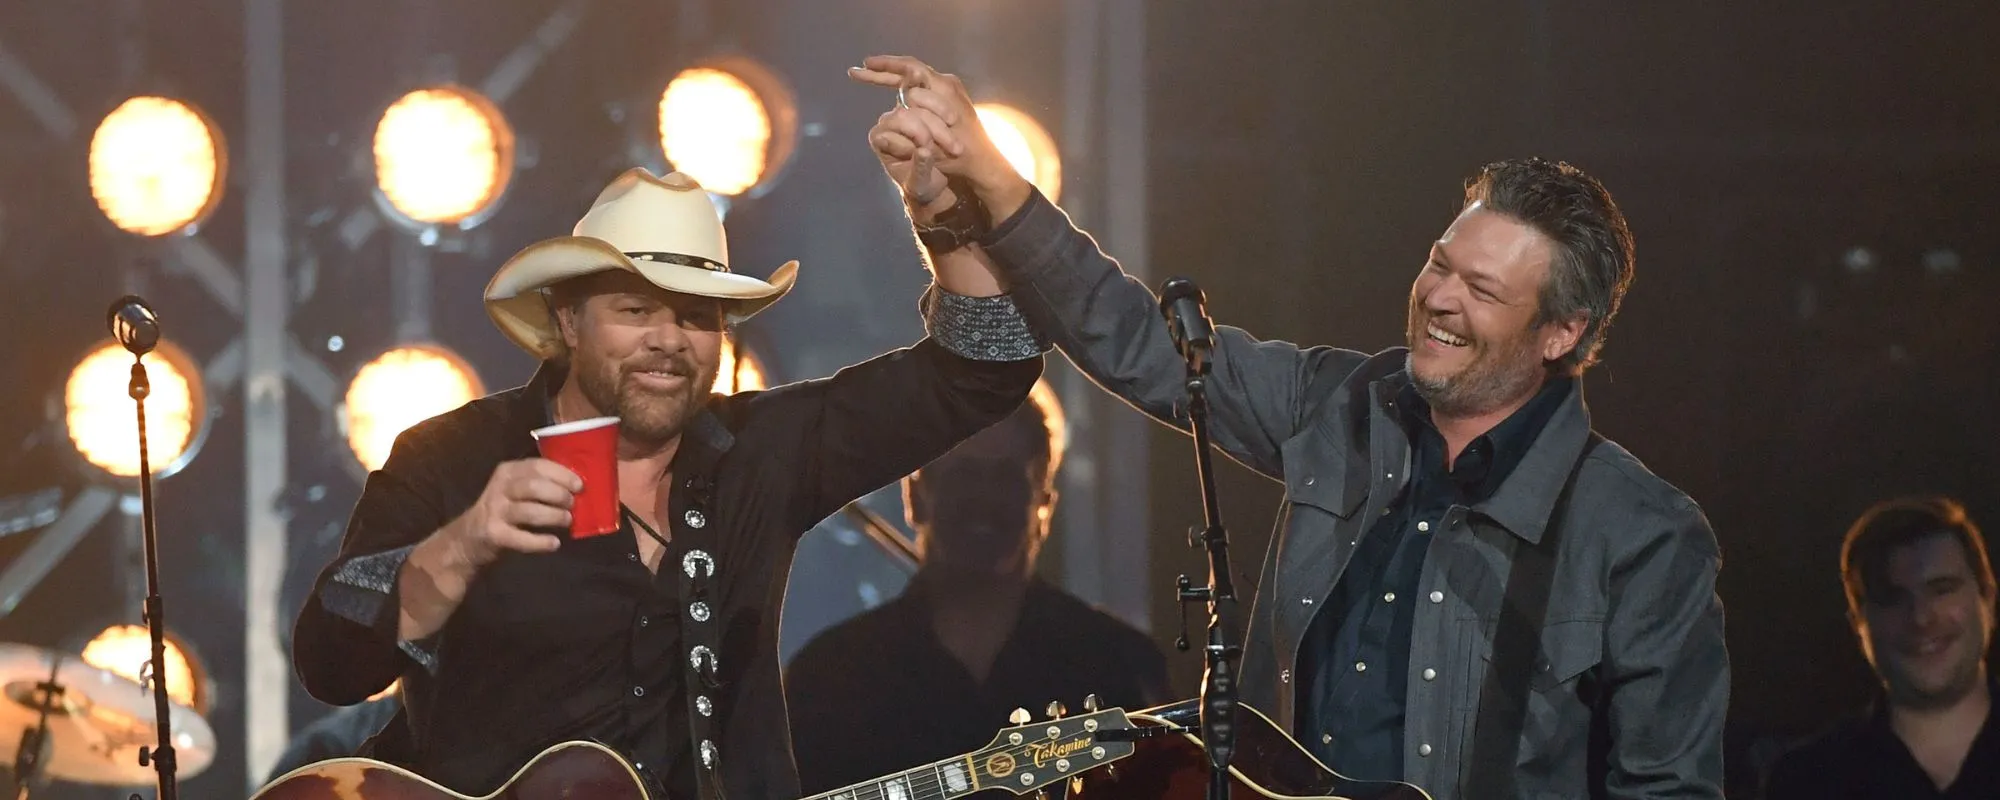 Blake Shelton Reveals Toby Keith’s Plans To Join Him on Stage in Oklahoma Before His Passing